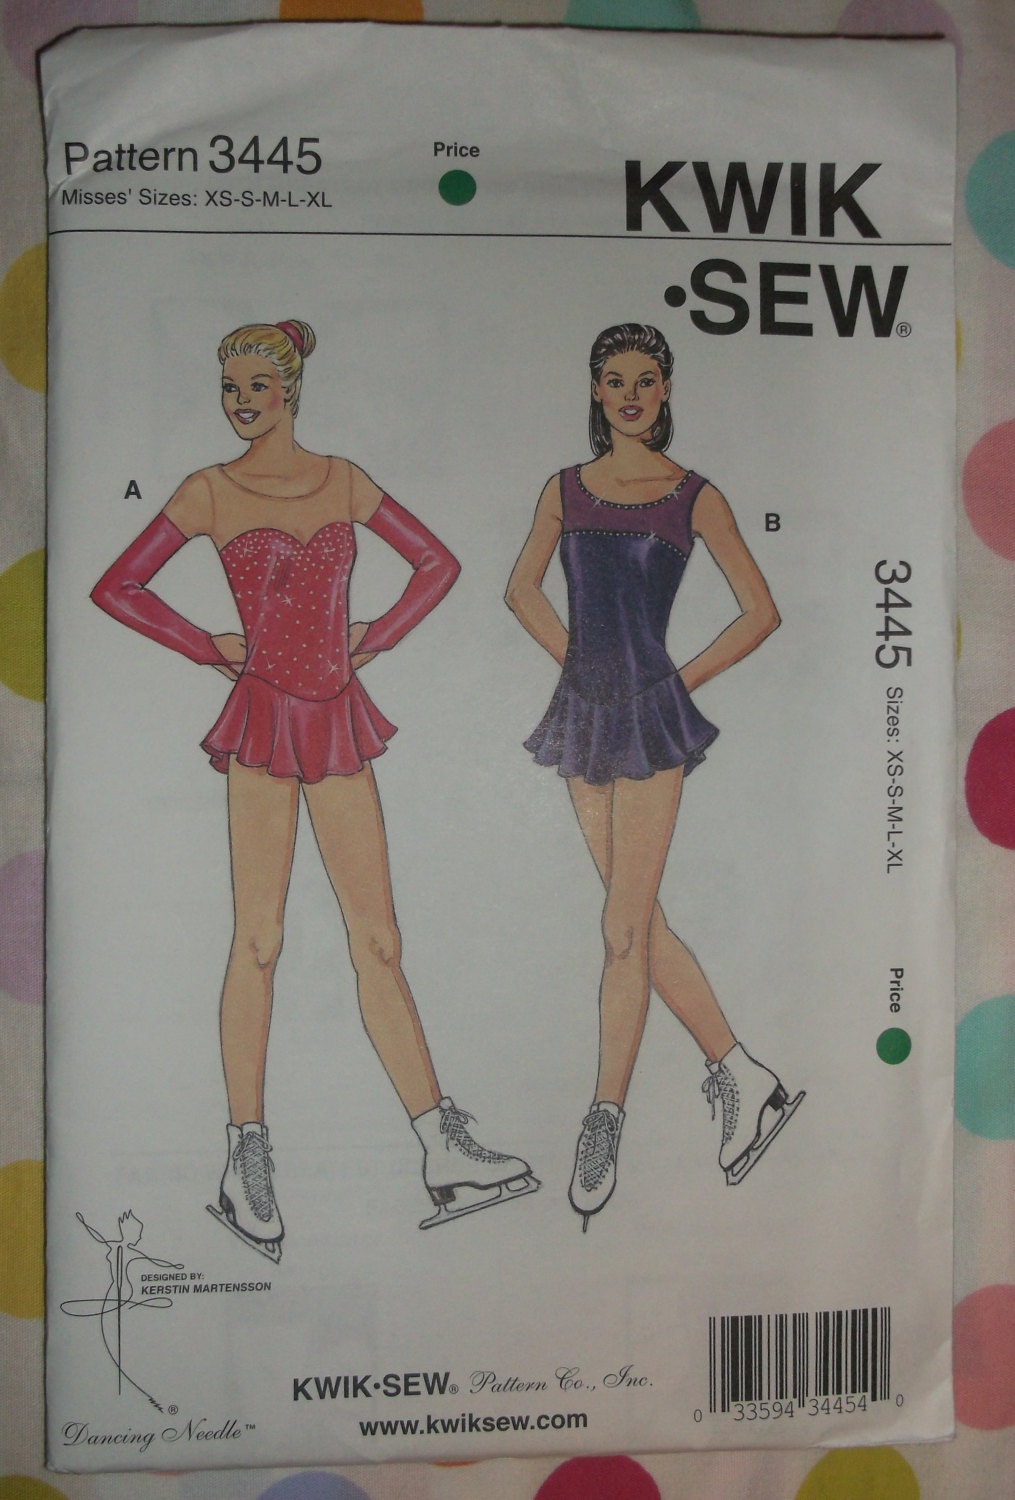 awesome-ladies-figure-skating-dress-pattern-by-msnightsdream